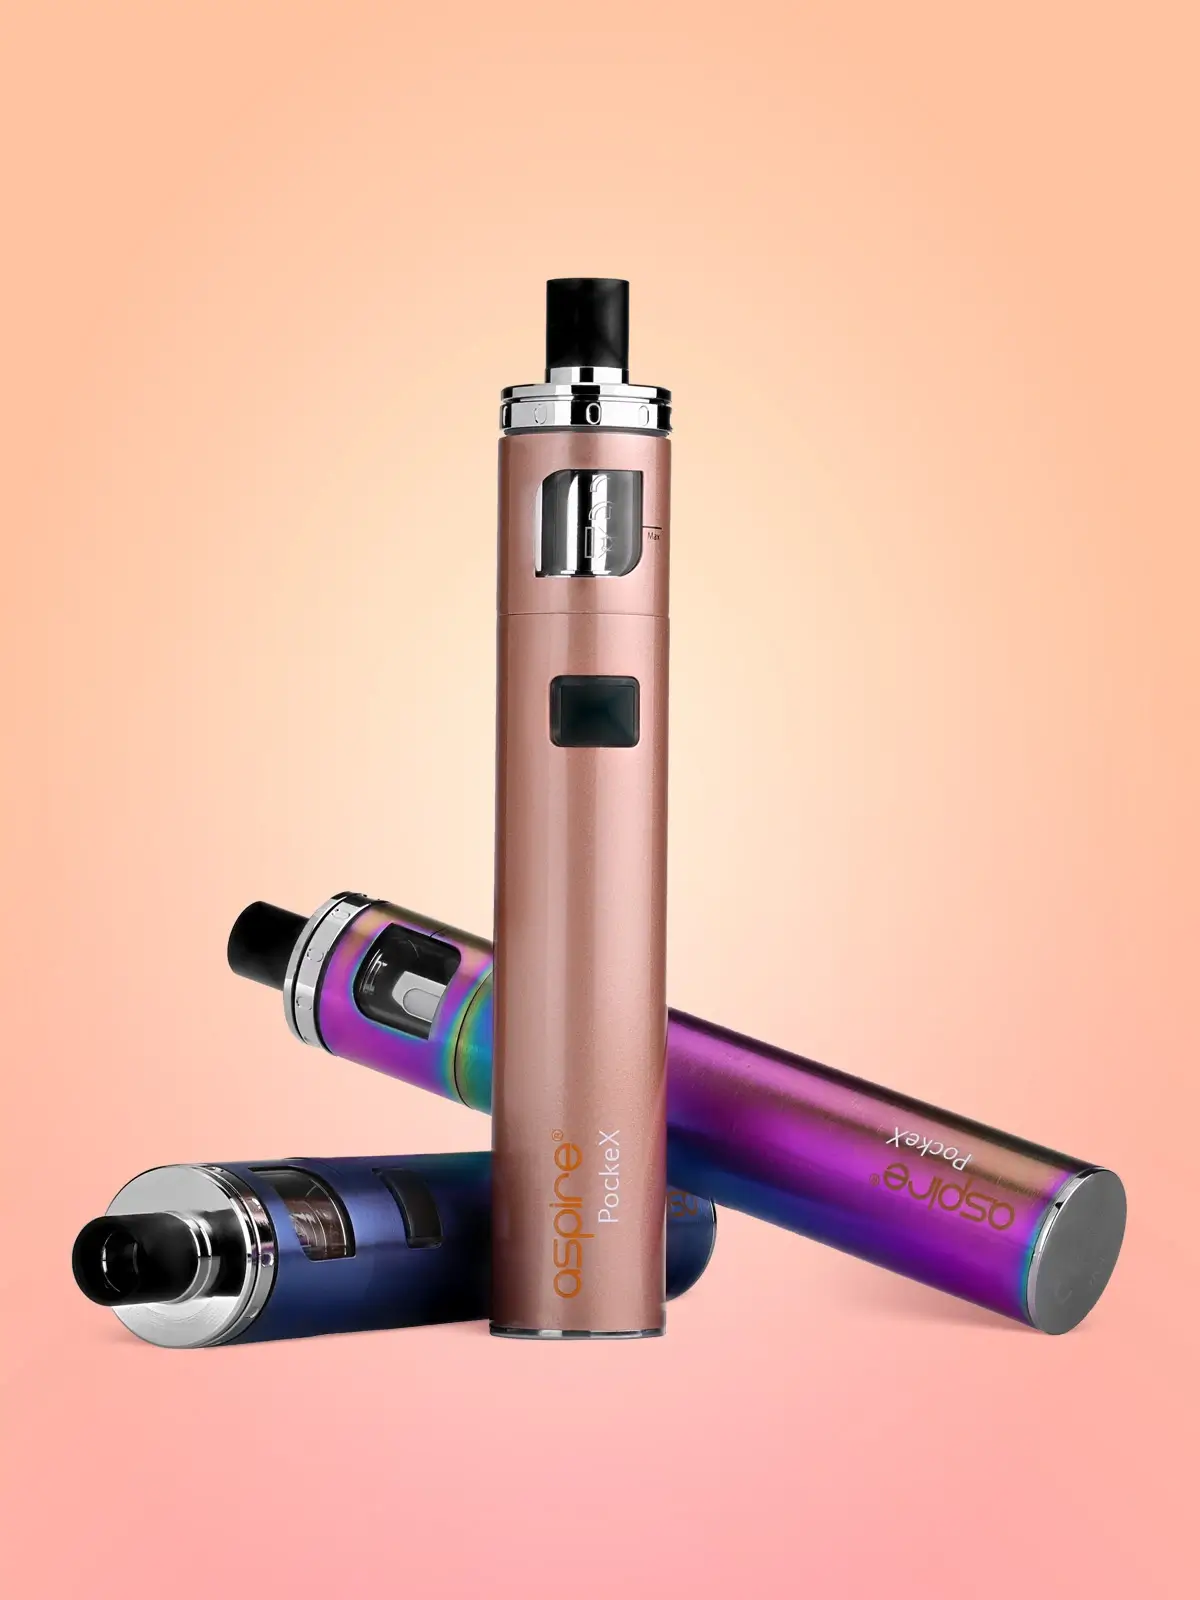 Three Aspire PockeX kits in various colours standing in front of a peach coloured background